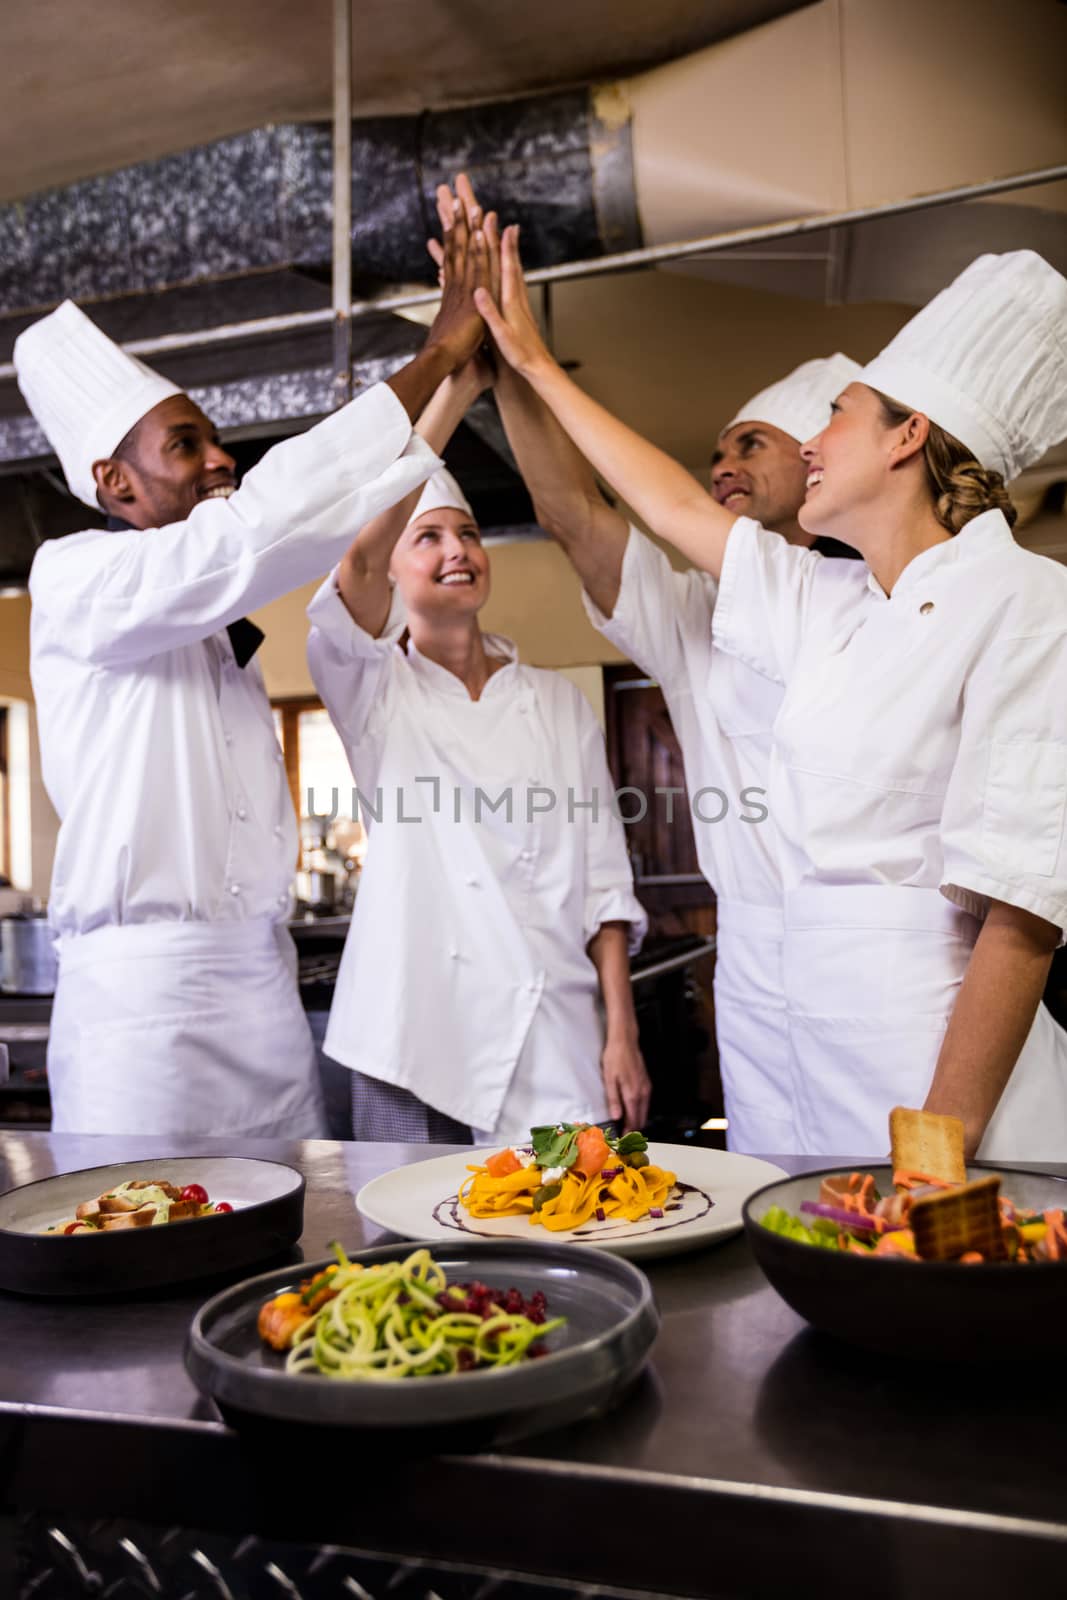 Group of chefs formig hands stack in kitchen by Wavebreakmedia